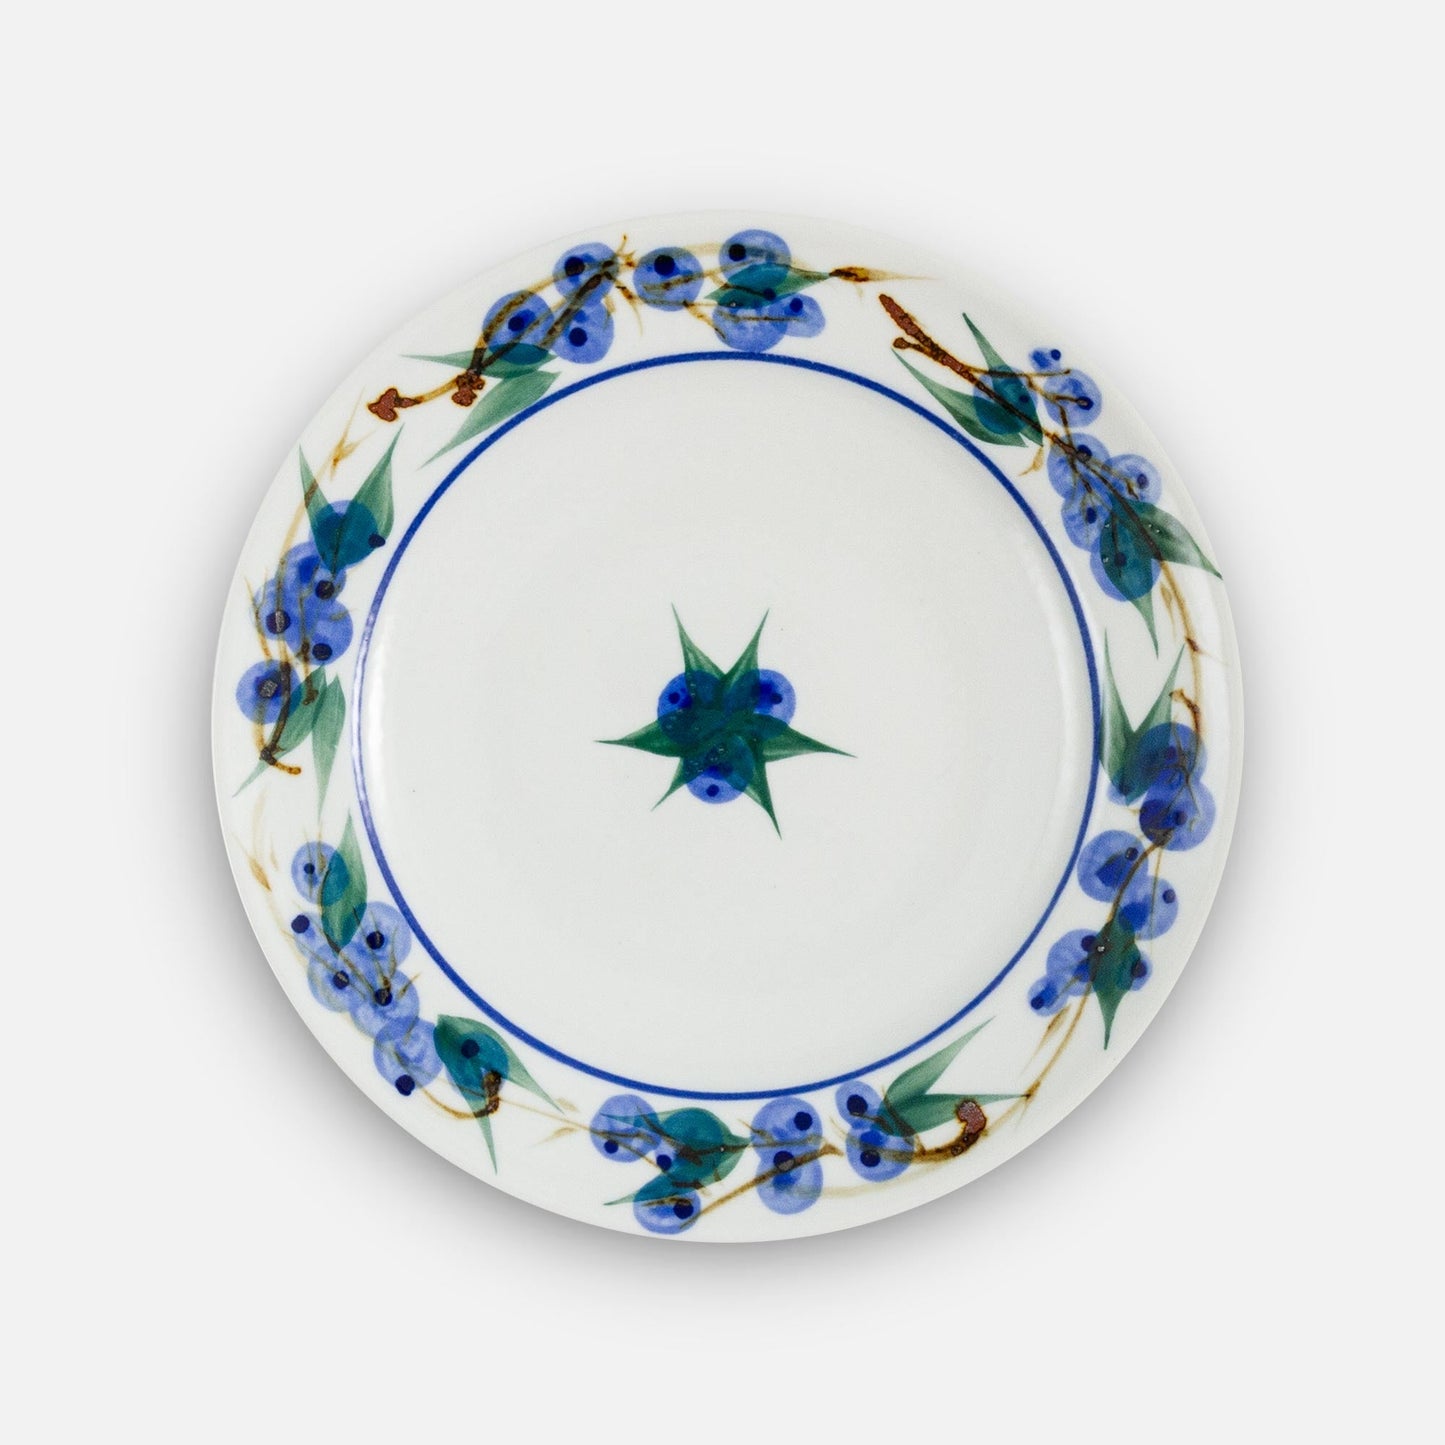 Handmade Pottery Rimless Dessert Plate made by Georgetown Pottery in Maine in Blueberry pattern